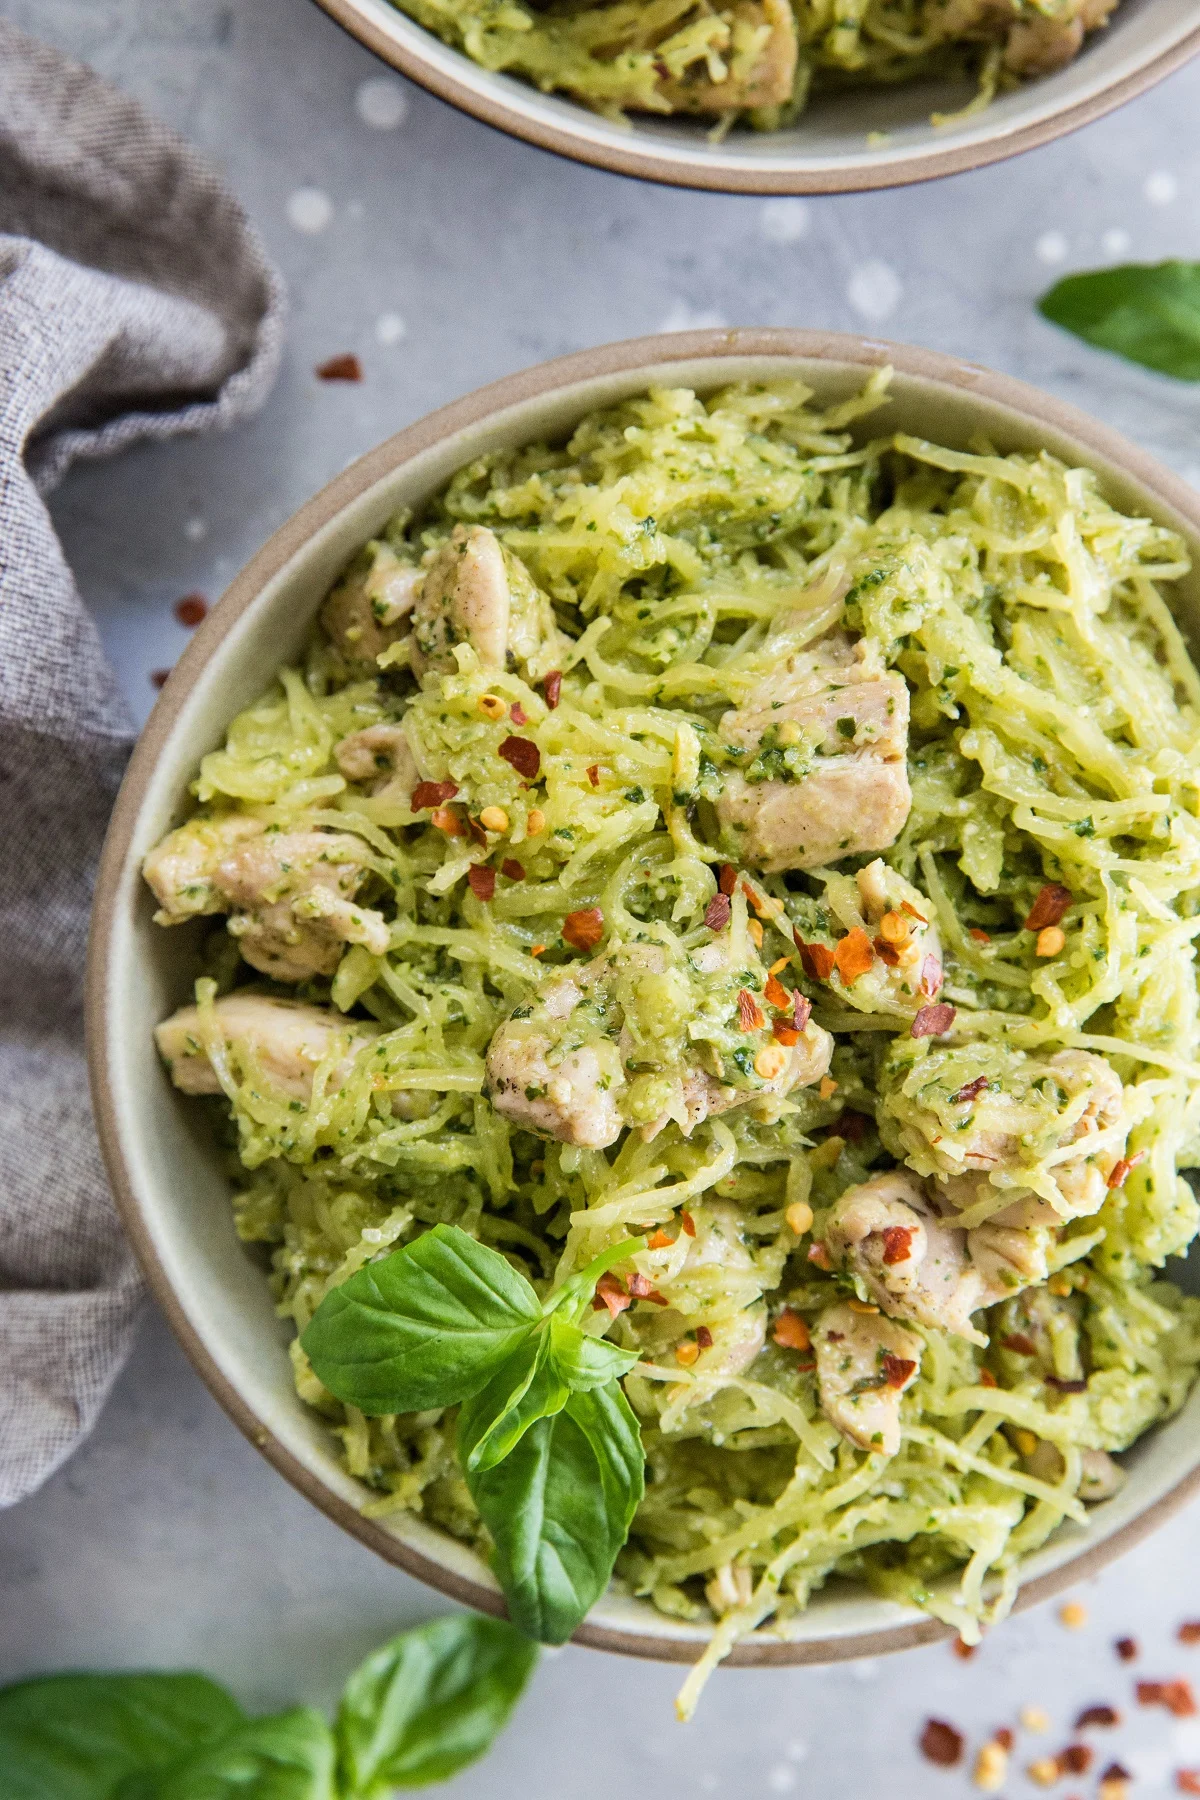 Chicken Pesto Spaghetti Squash - a clean dinner recipe that is paleo, keto, whole30 and easy to make | TheRoastedRoot.net #glutenfree #grainfree